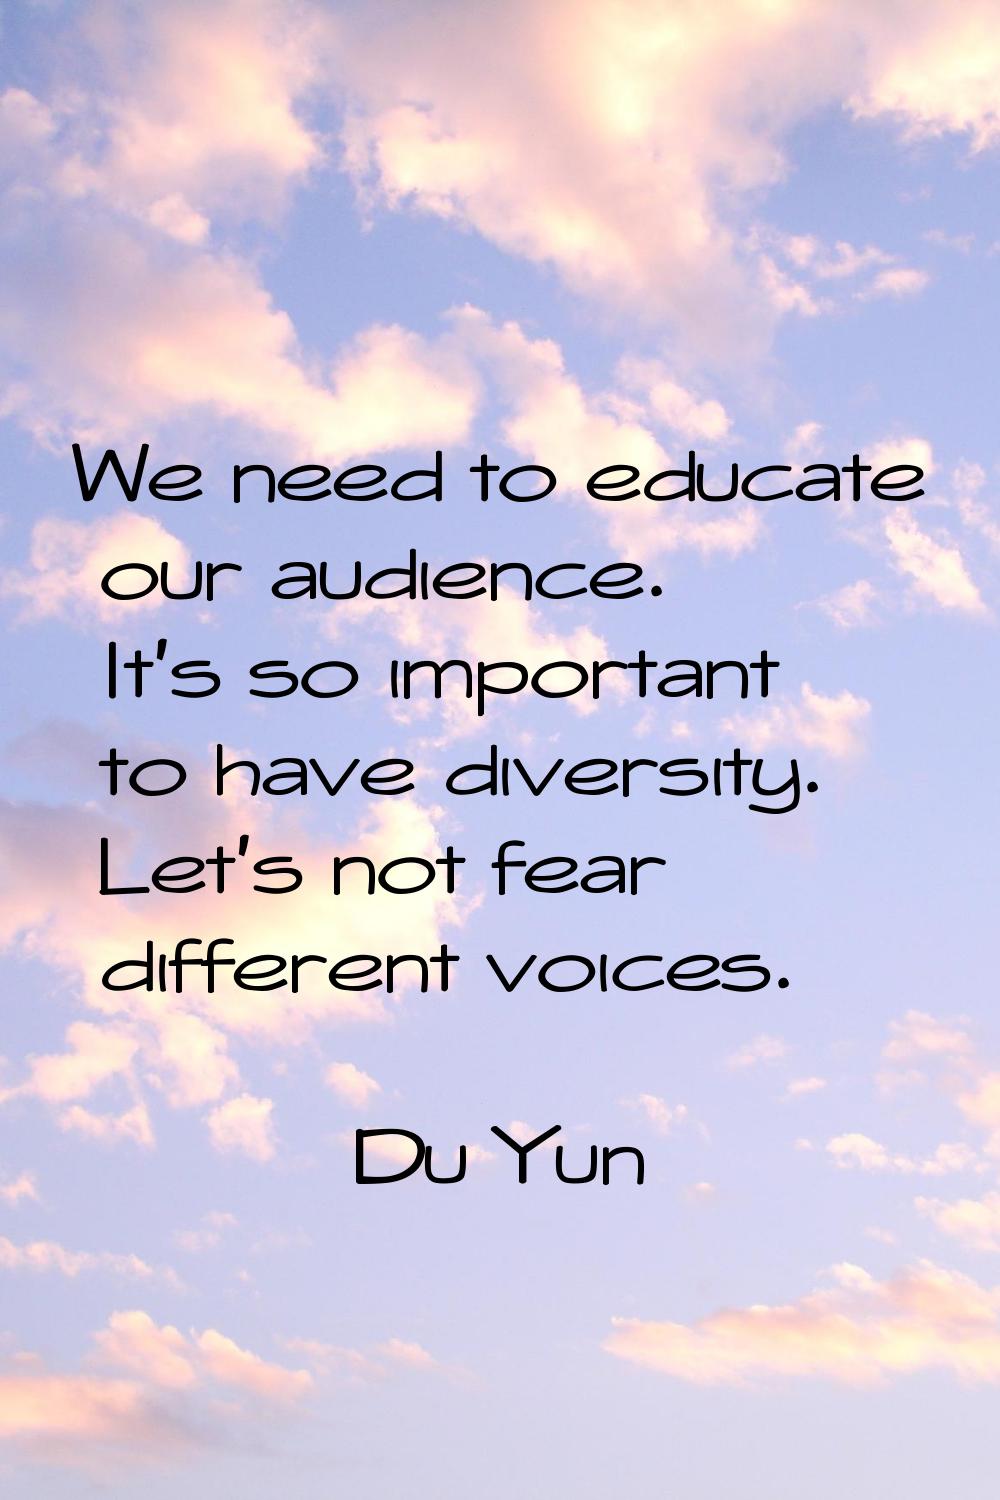 We need to educate our audience. It's so important to have diversity. Let's not fear different voic